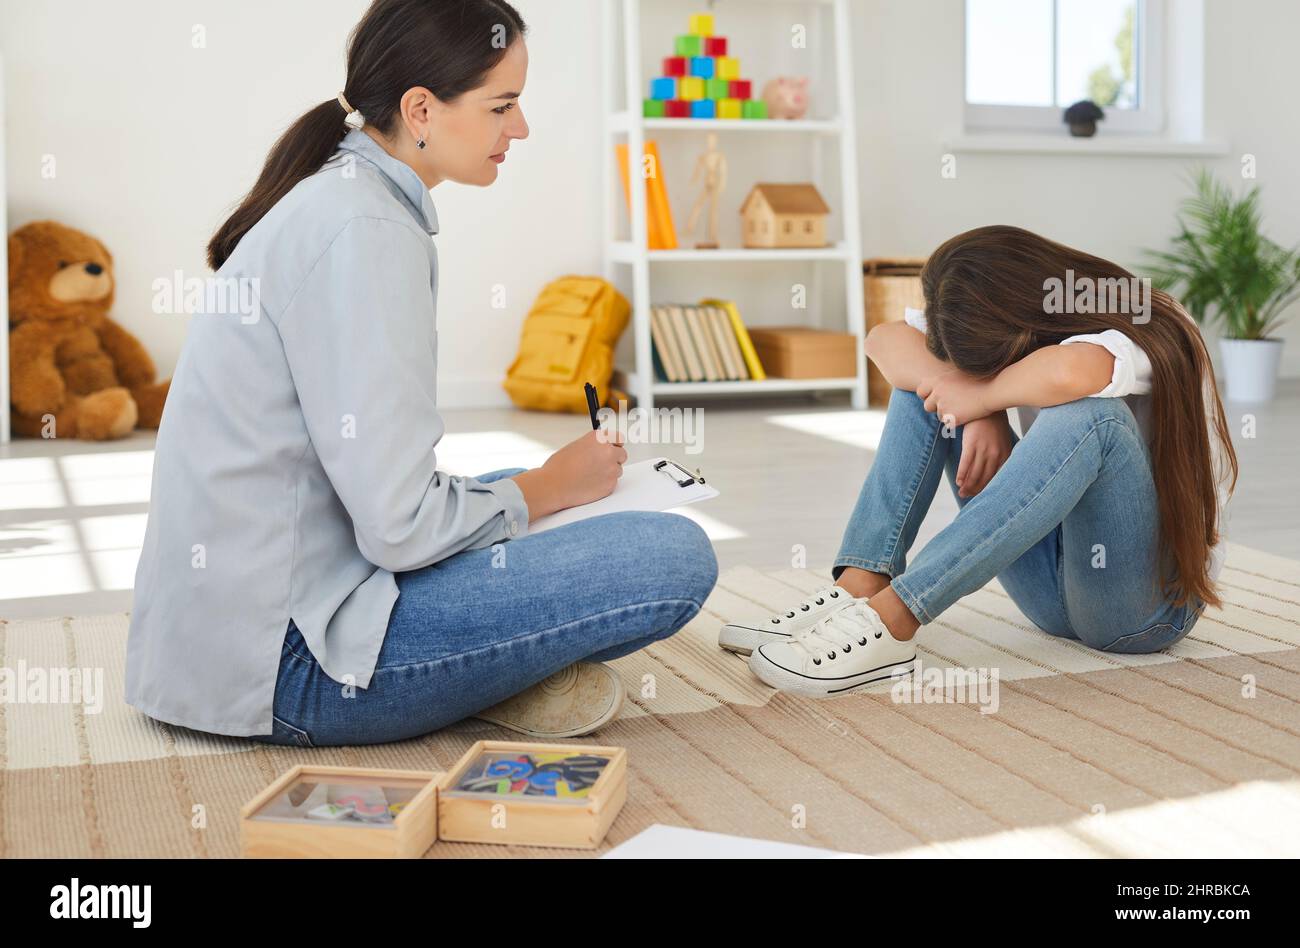 Female school psychologist talks to teenage girl about child's problems with peers. Stock Photo